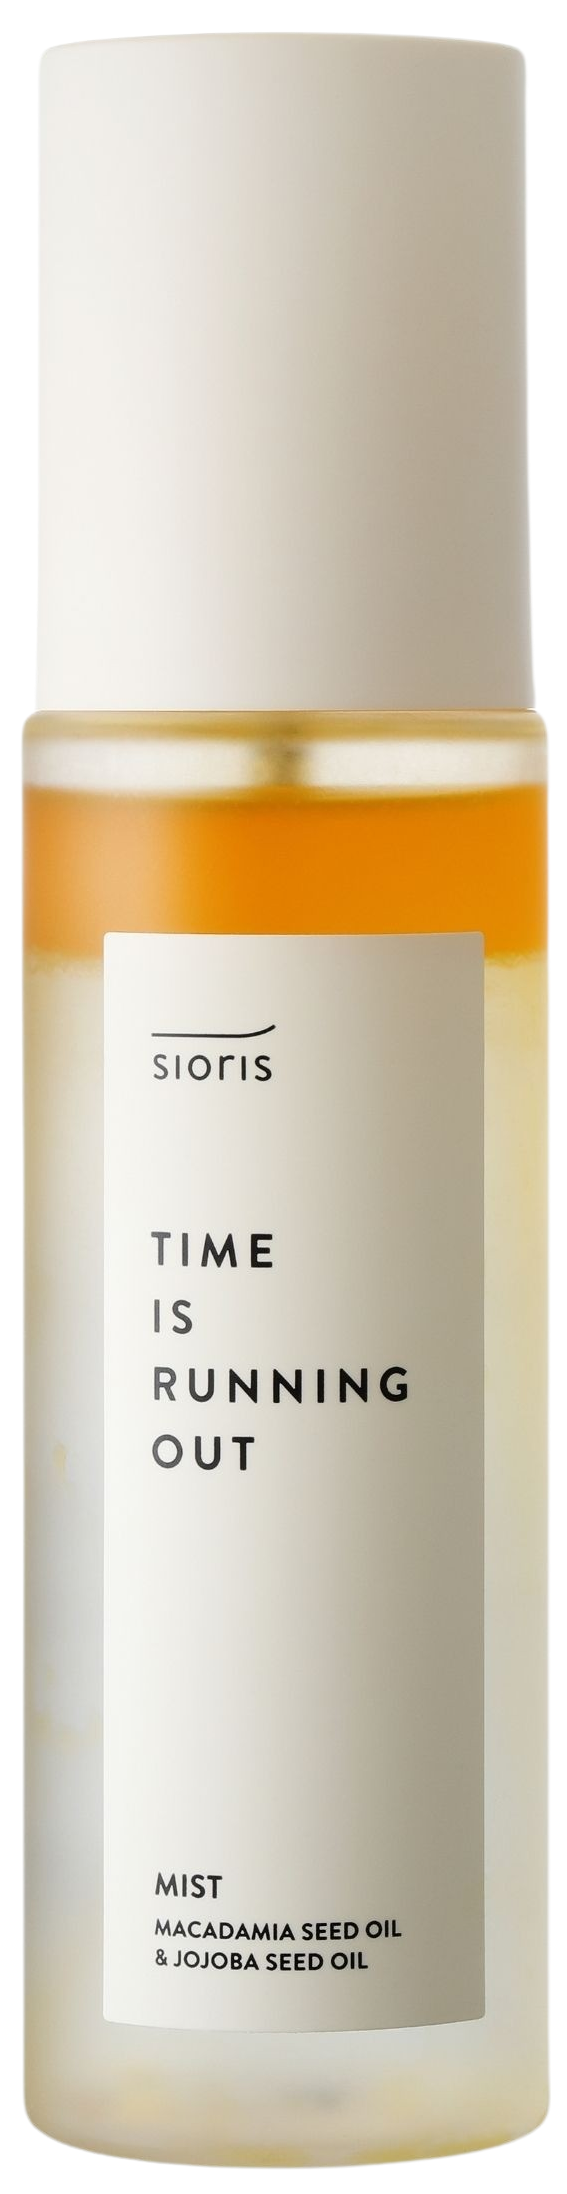 Sioris Time Is Running Out Mist, 100 ml